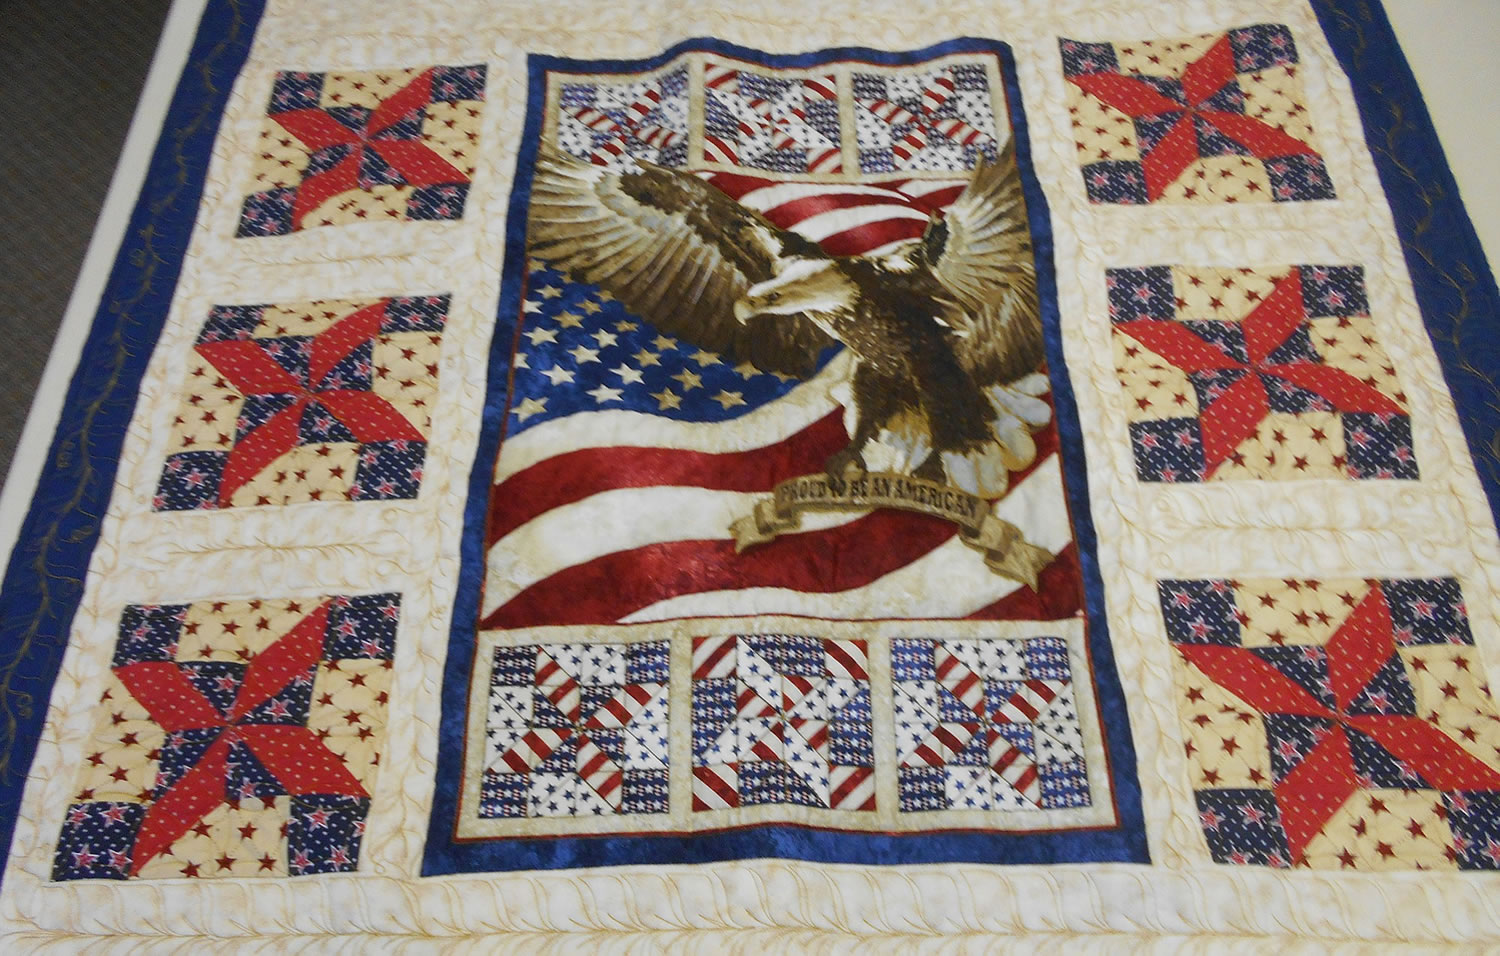 A veteran will be awarded this quilt made by the North Clark Historical Museum quilters at the 27th annual Community Celebration Honoring Veterans at the Mt.